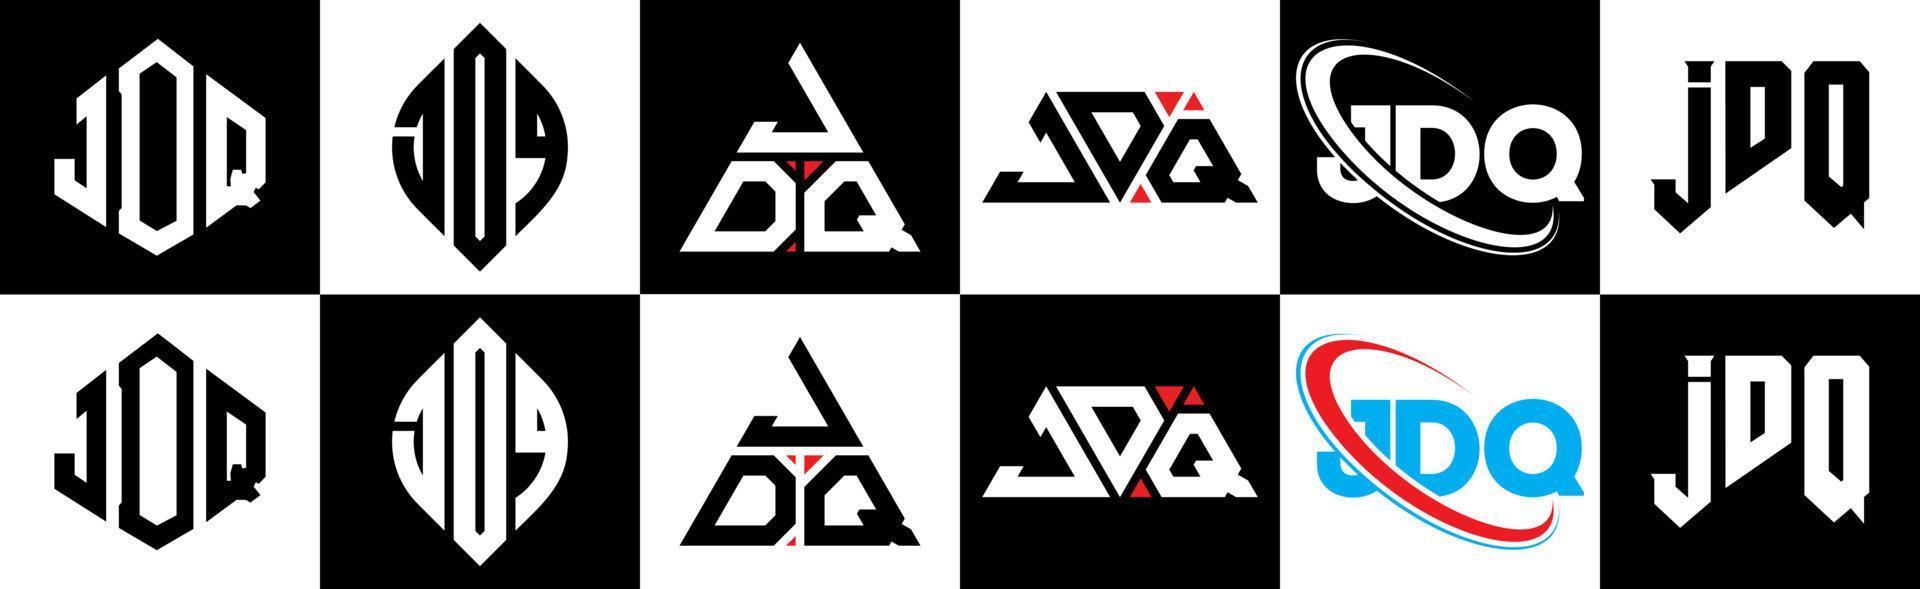 JDQ letter logo design in six style. JDQ polygon, circle, triangle, hexagon, flat and simple style with black and white color variation letter logo set in one artboard. JDQ minimalist and classic logo vector